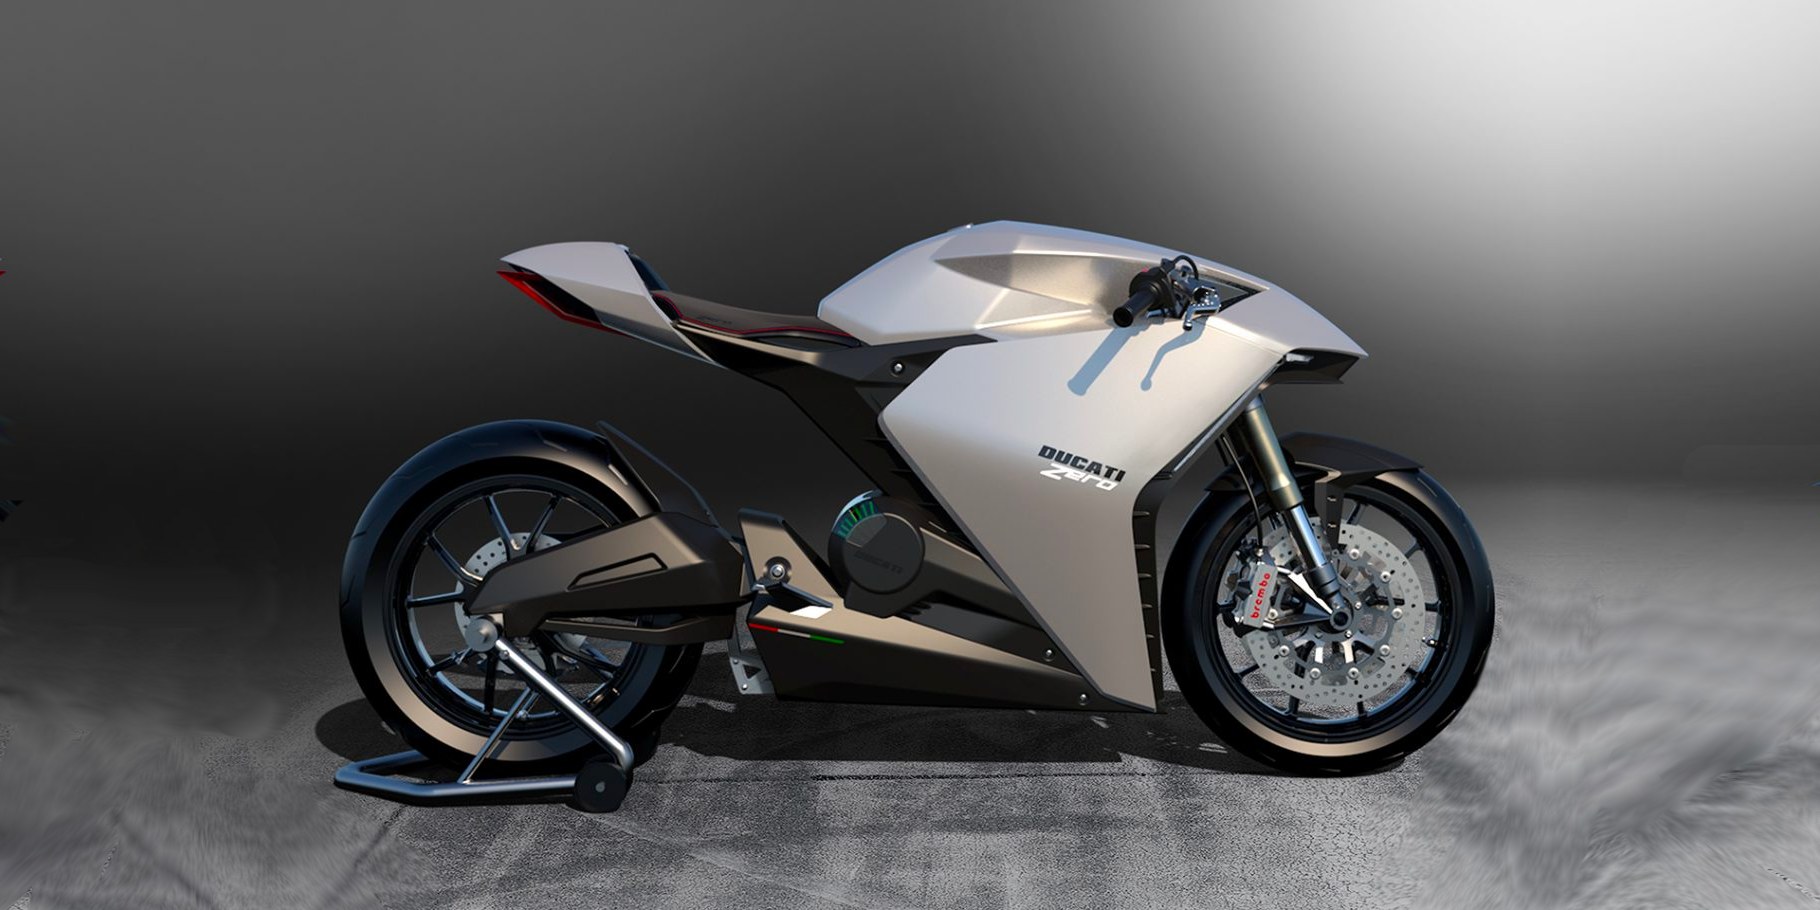 Ducati CEO confirms the italian company is making an electric motorcycle